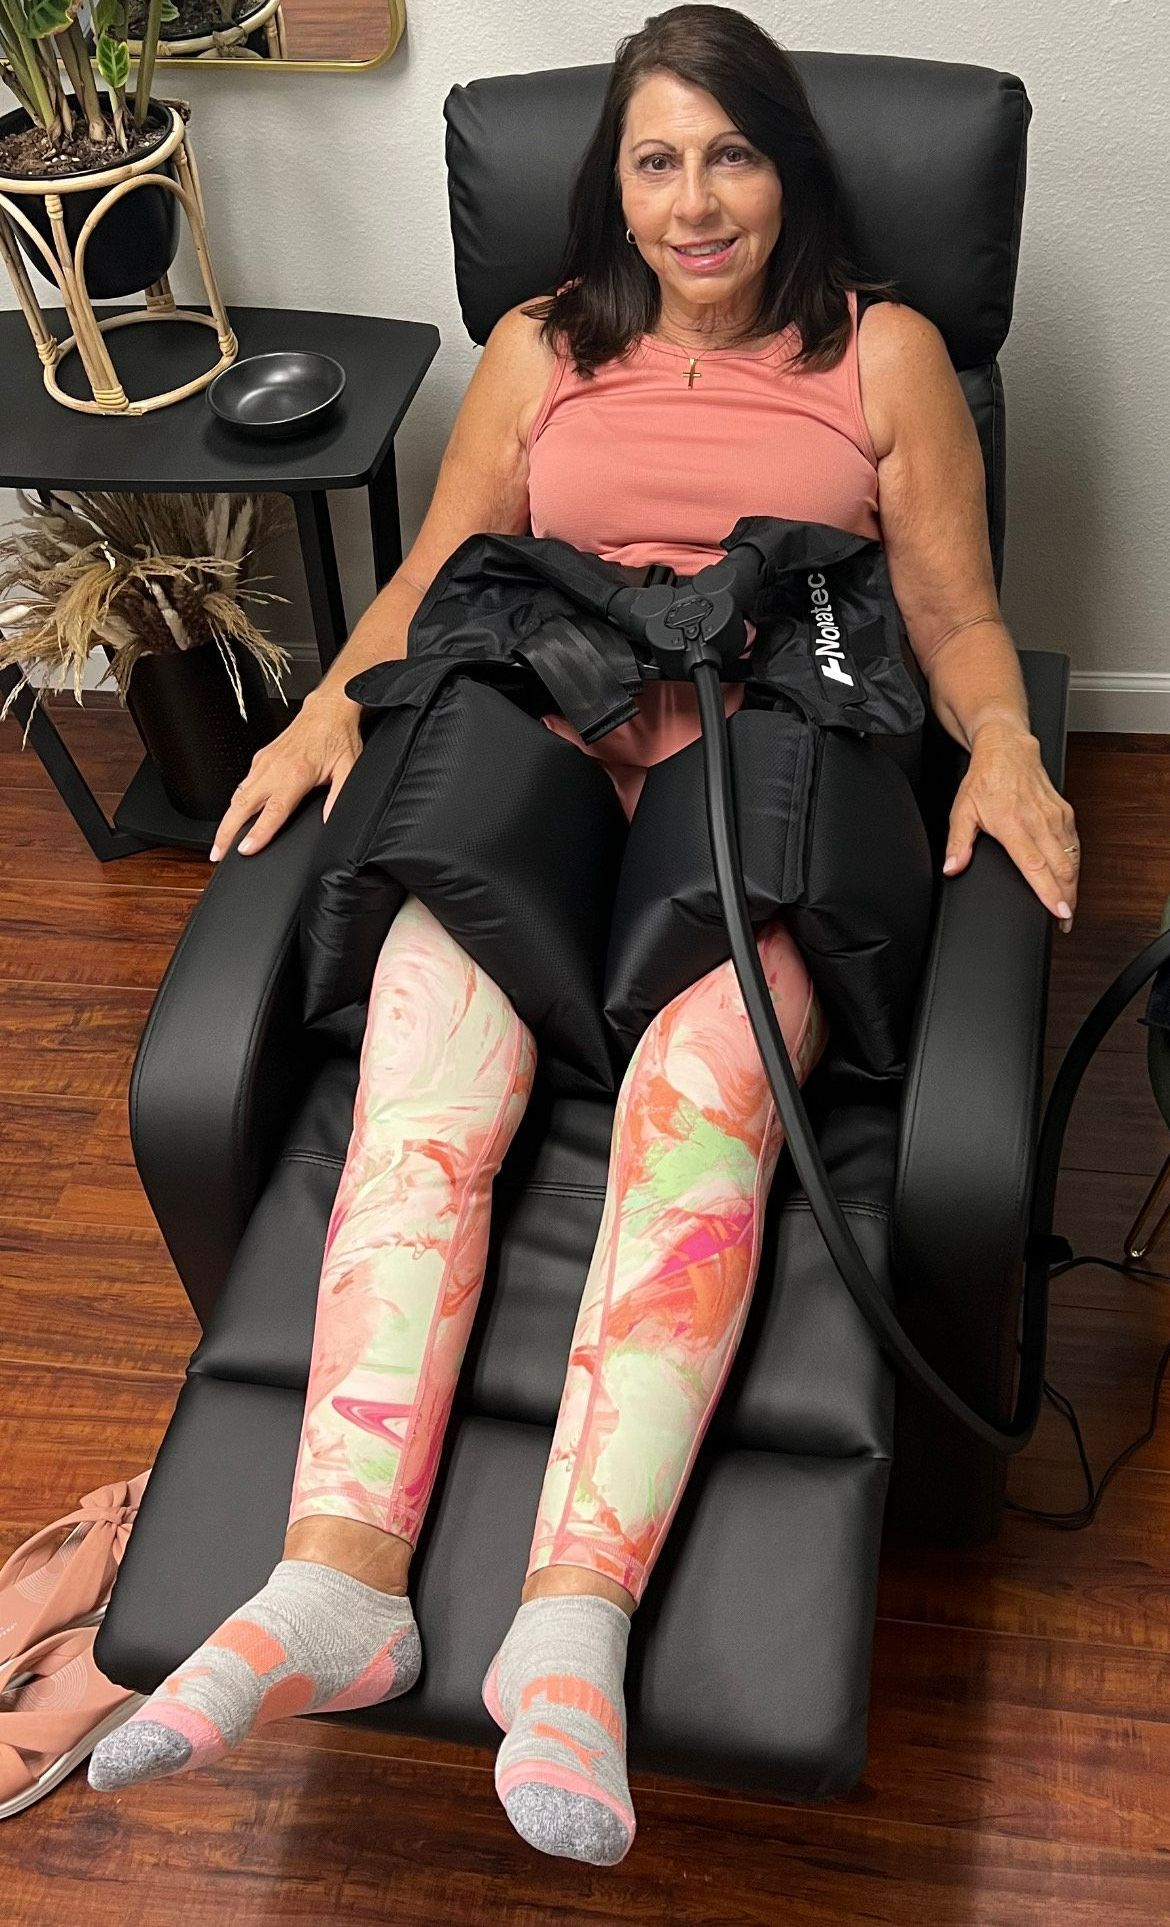 A woman is sitting in a chair with a machine on her legs.